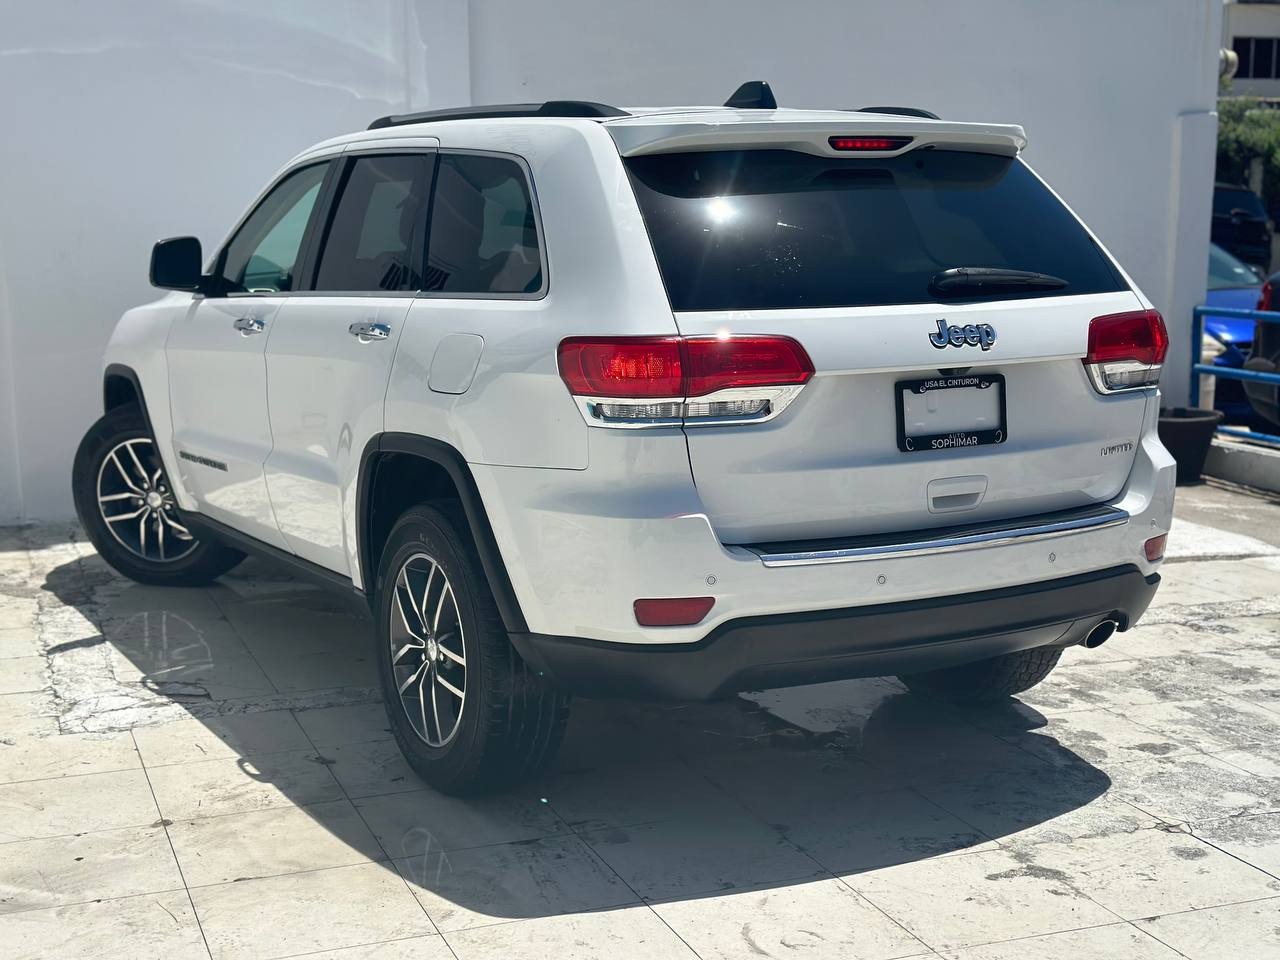 jeepetas y camionetas - JEEP GRAND CHEROKEE LLIMITED PANORAMICO 2018CLEAN CARFAX 3